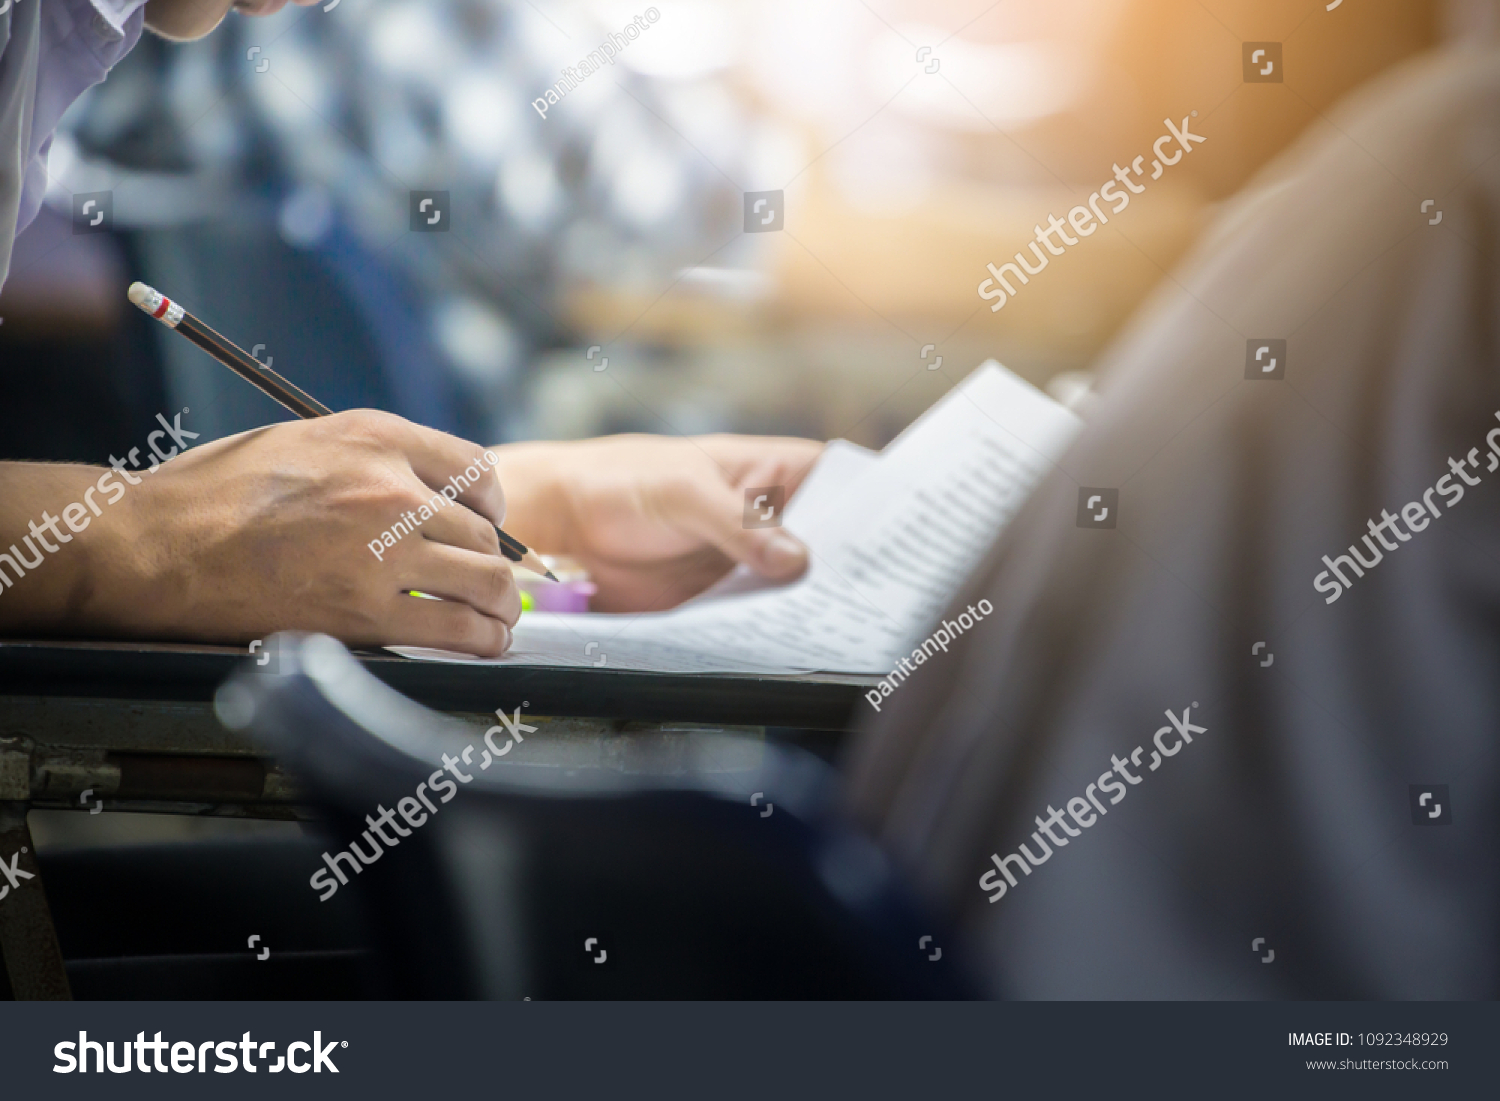 soft focus.hand high school or university student in uniform holding pencil writing on paper answer sheet.sitting on lecture chair taking final exam or study attending in examination room or classroom #1092348929